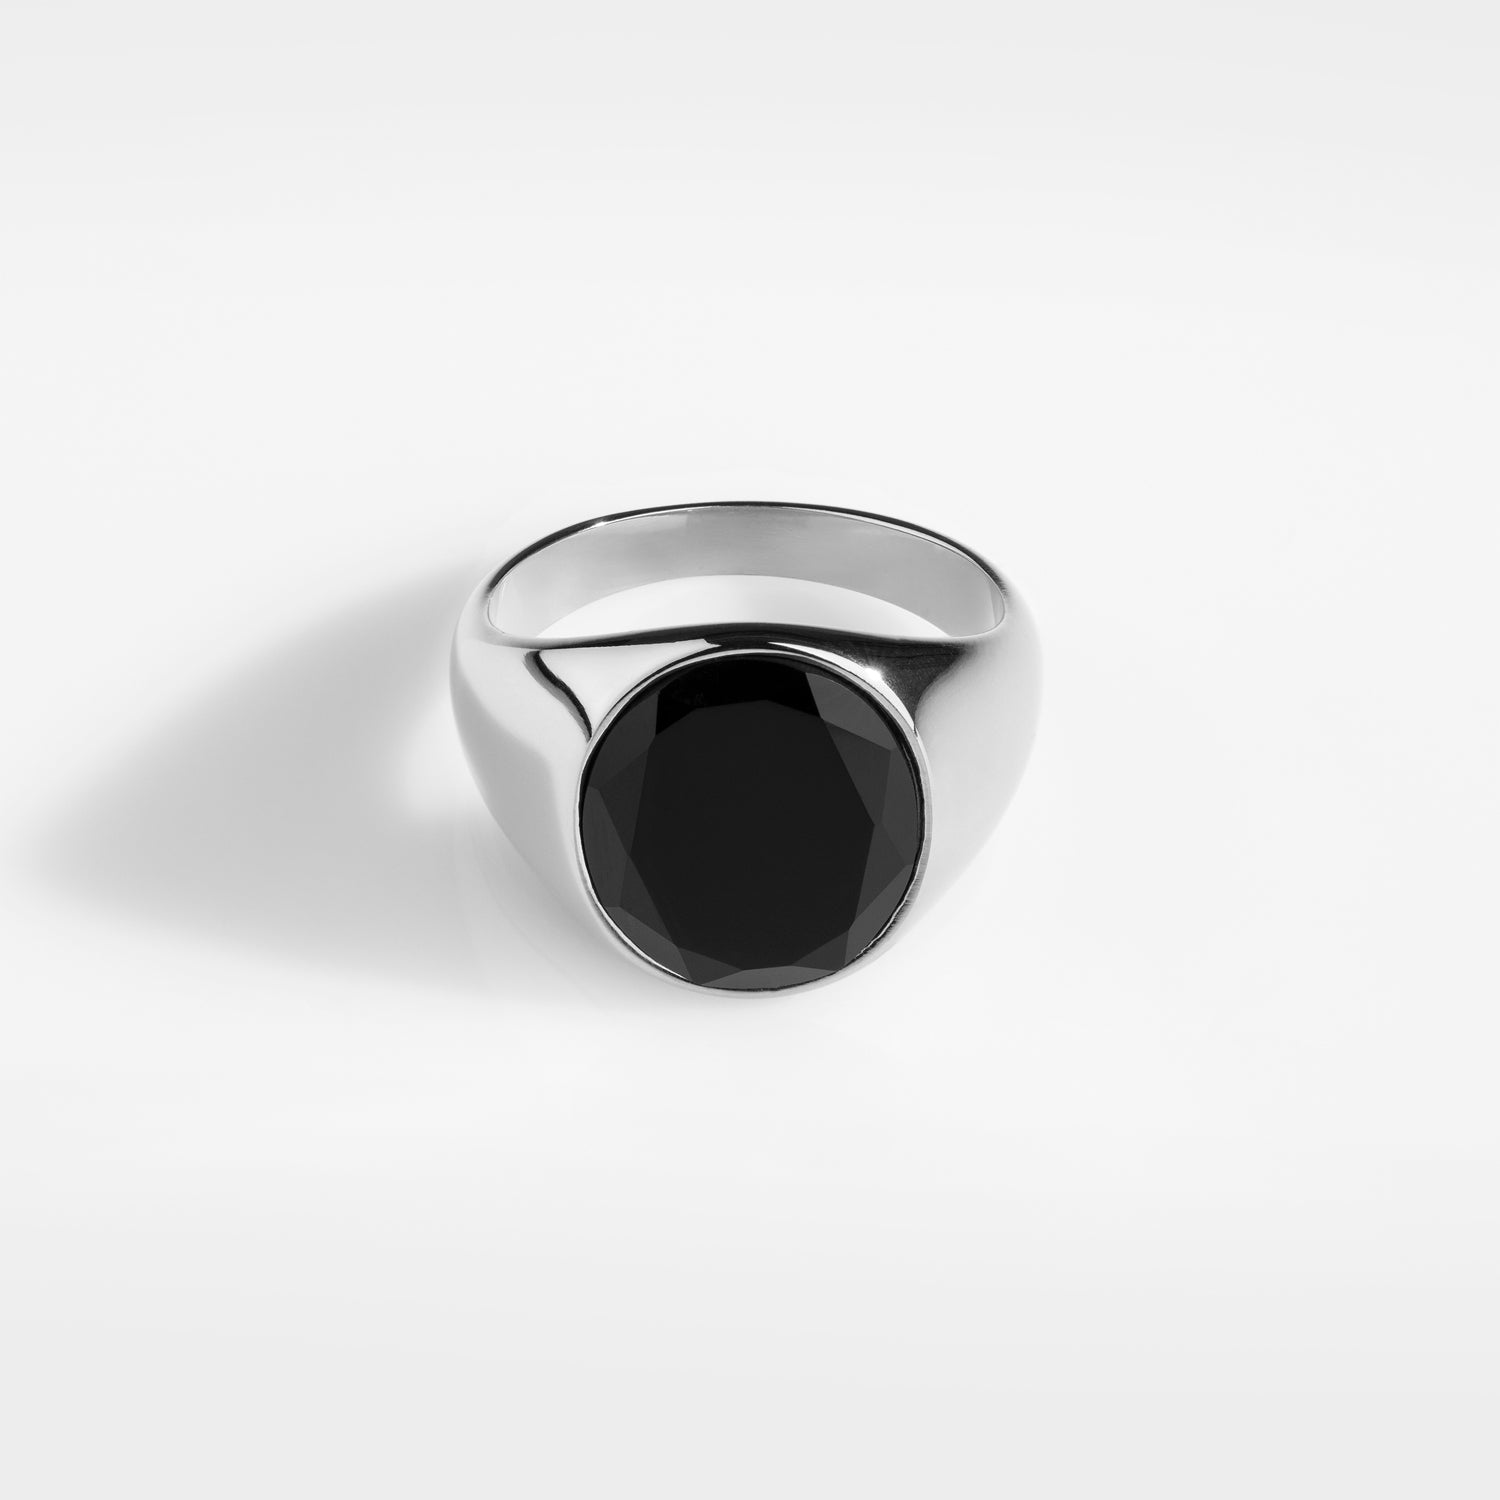 Oval Black Onyx Signature - Silver-toned ring